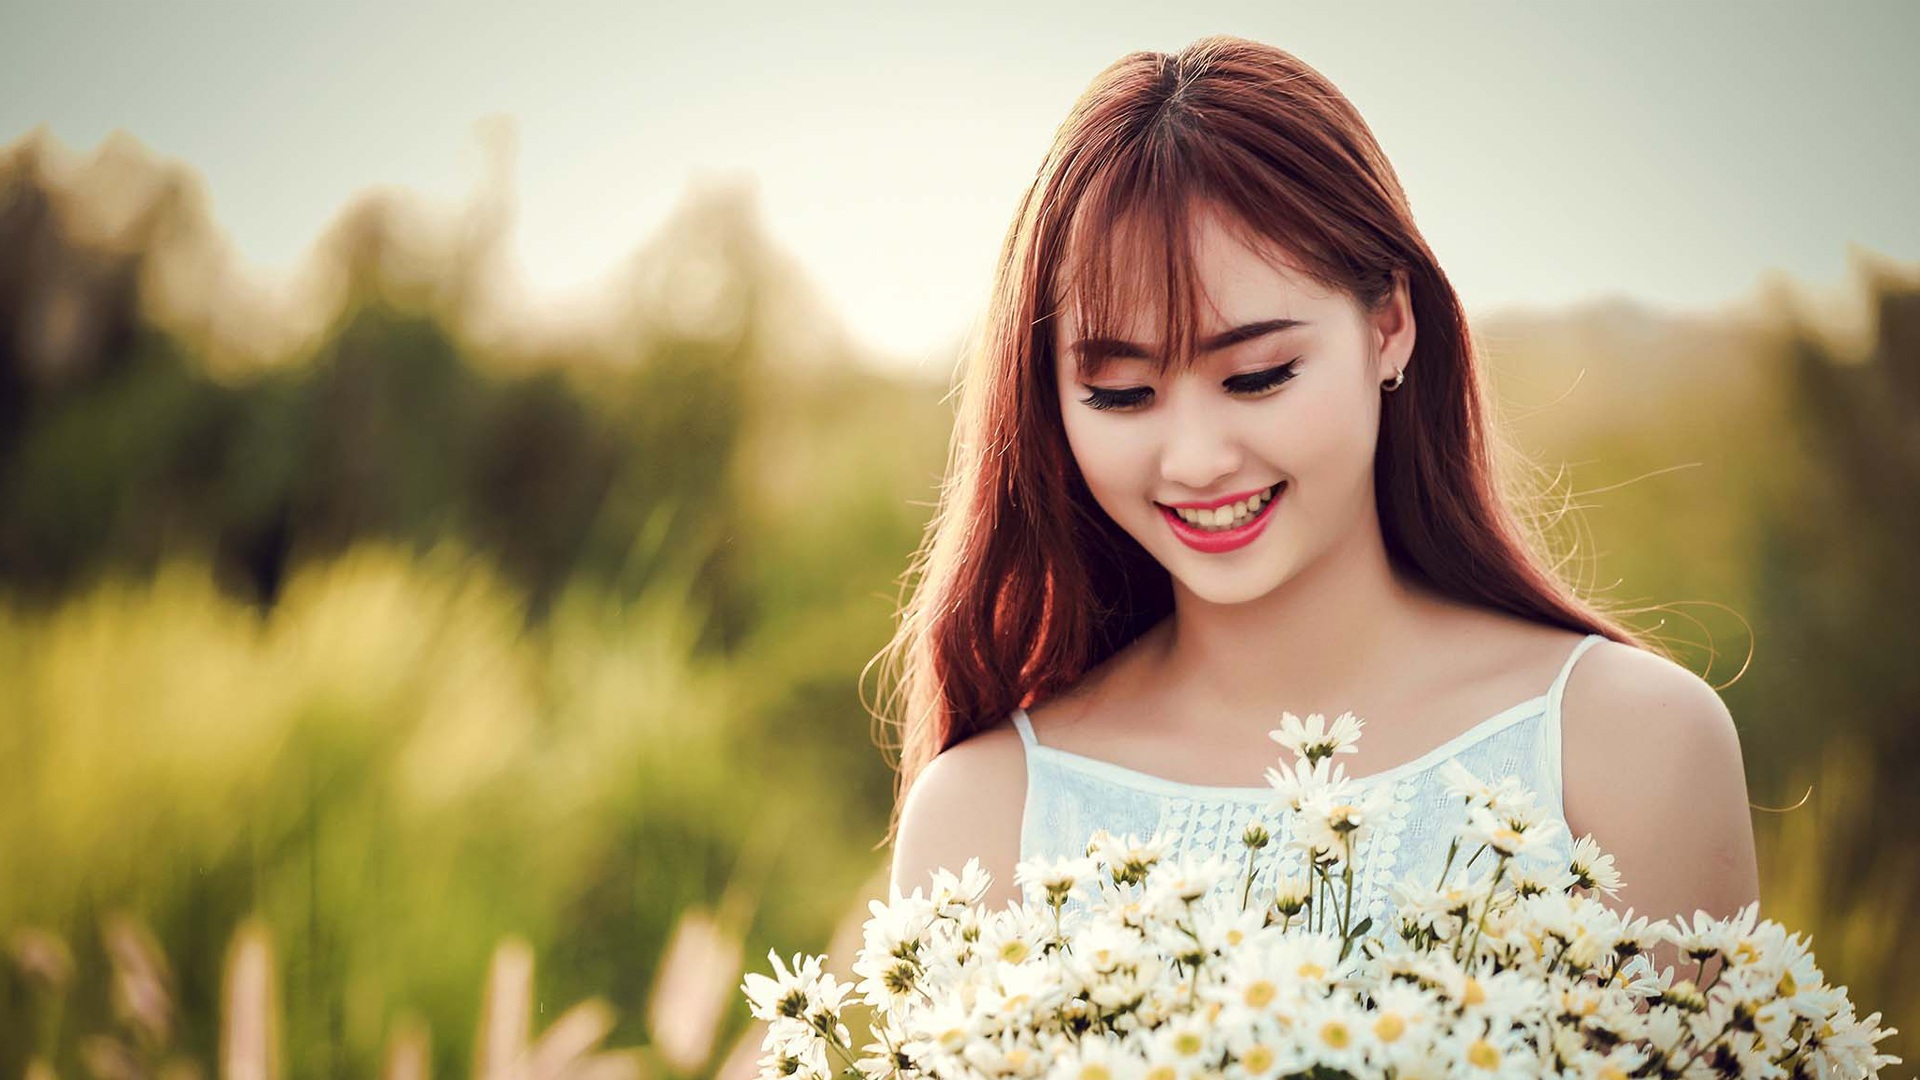 Free Photo of Asian Girl with Flowers